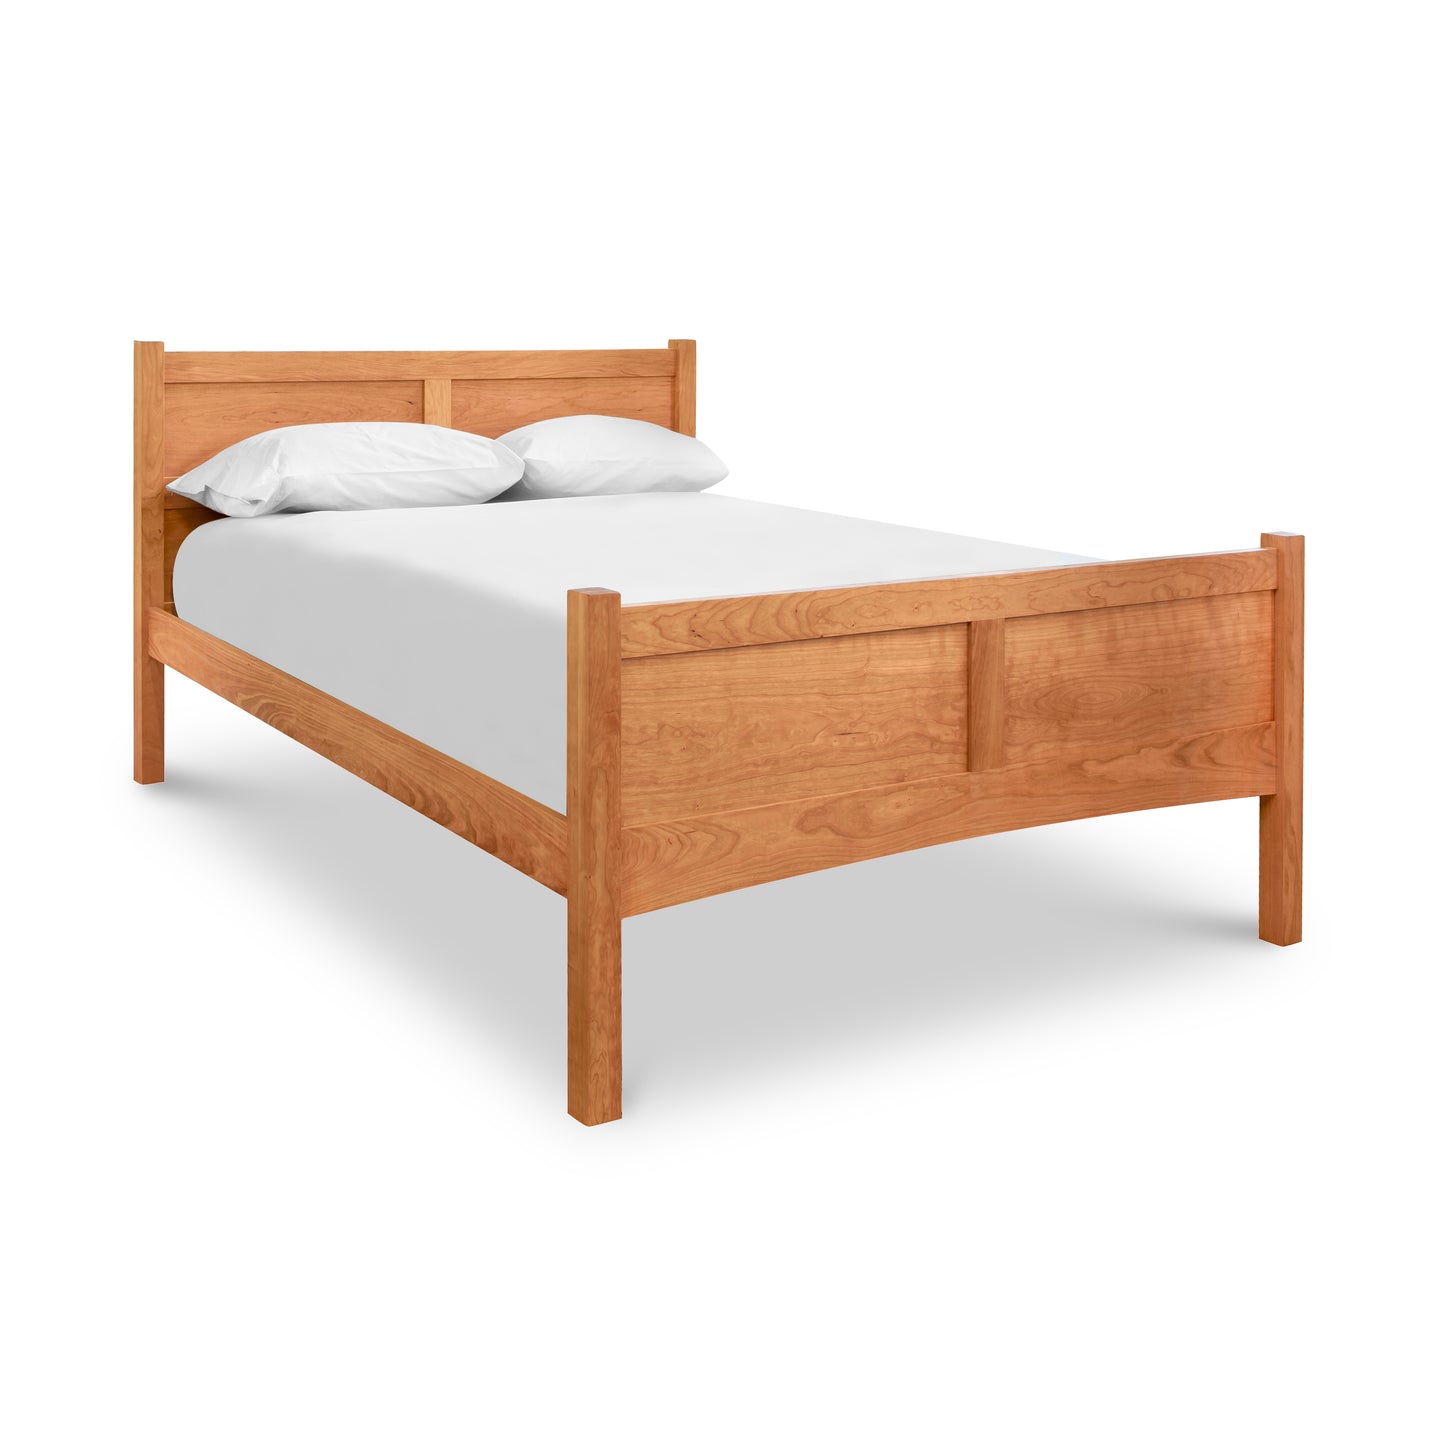 A cherry wood Vermont Furniture Designs Essex High Footboard Bed, with a simple headboard, fitted with white linens and two pillows, isolated on a white background.